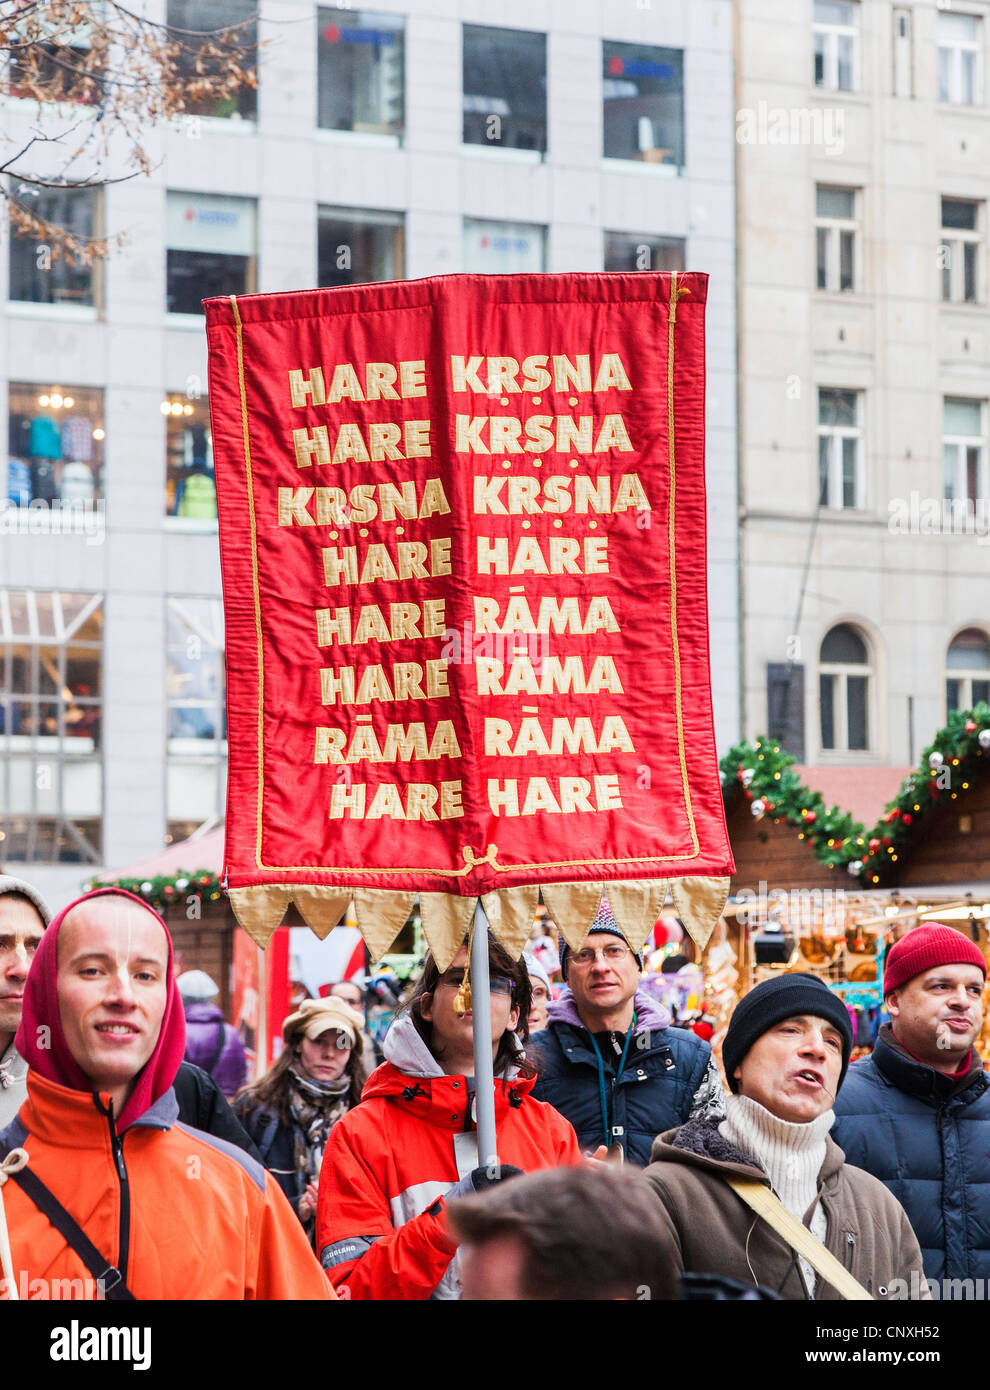 Hare Krishna followers, parading and chanting in good humour with banners in Wenceslas Square, Prague, Czech Republic Stock Photo